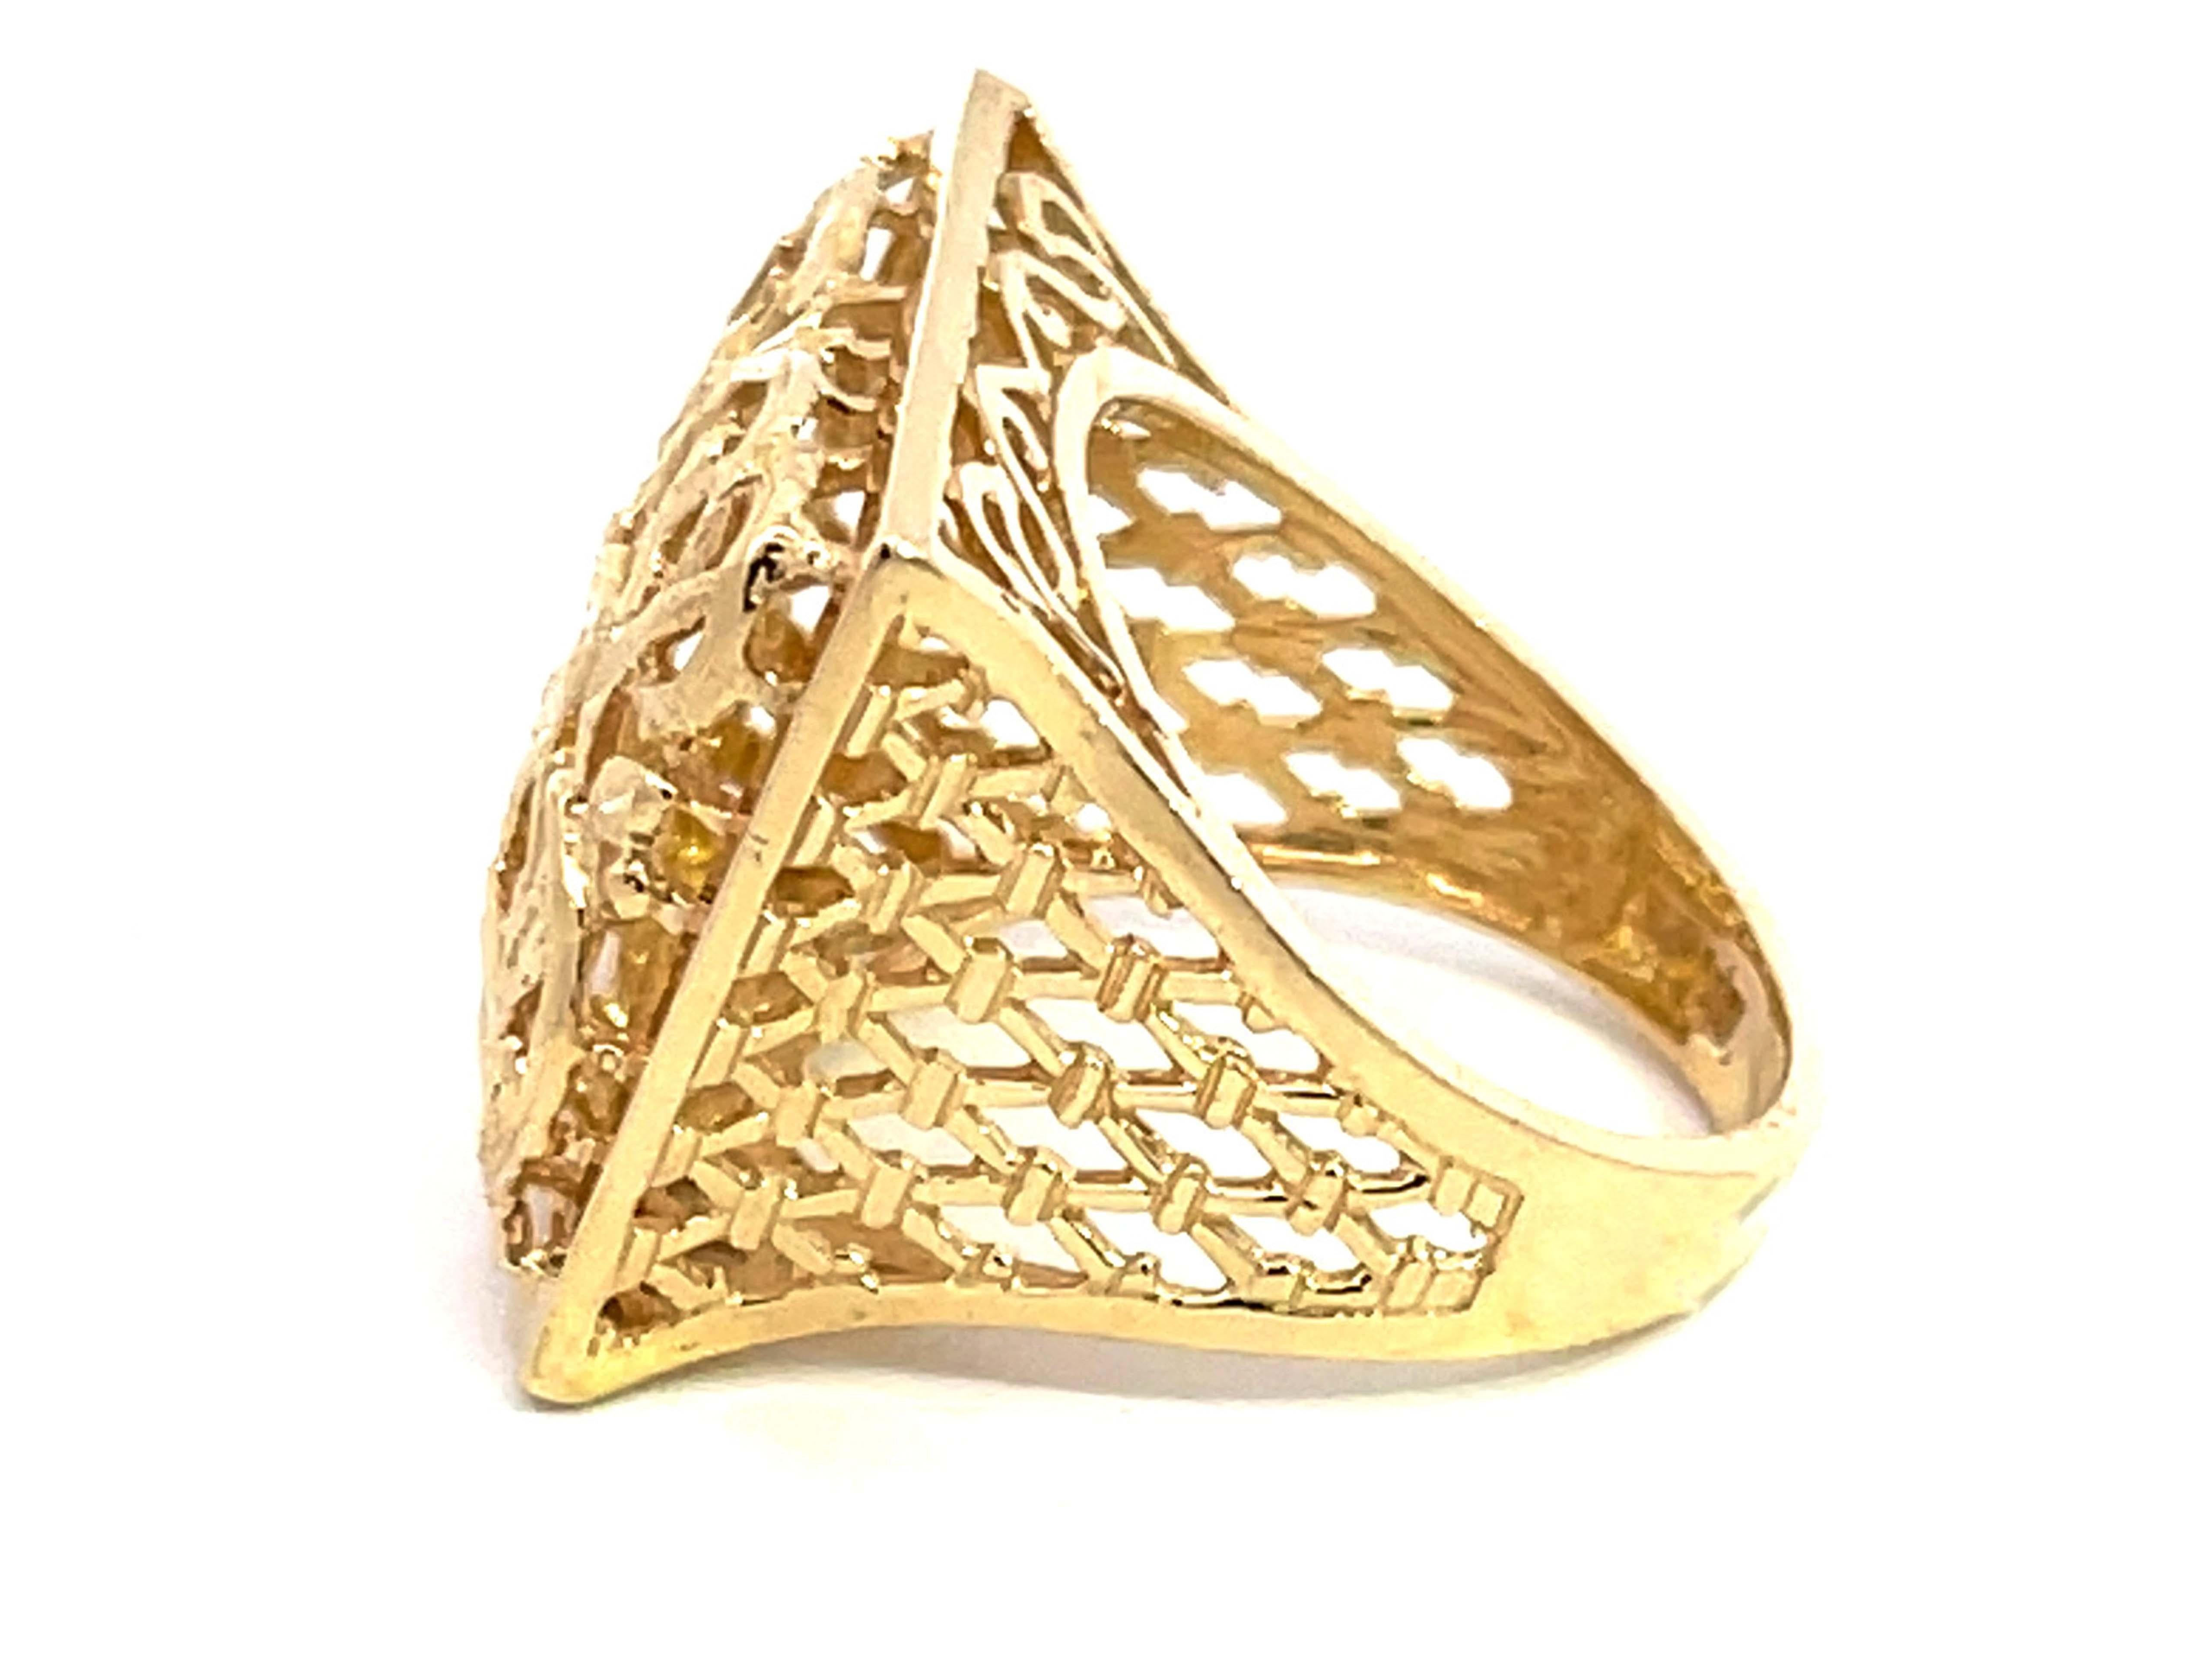 Large Rectangular Scroll Cutout Ring in 14k Yellow Gold In Excellent Condition For Sale In Honolulu, HI